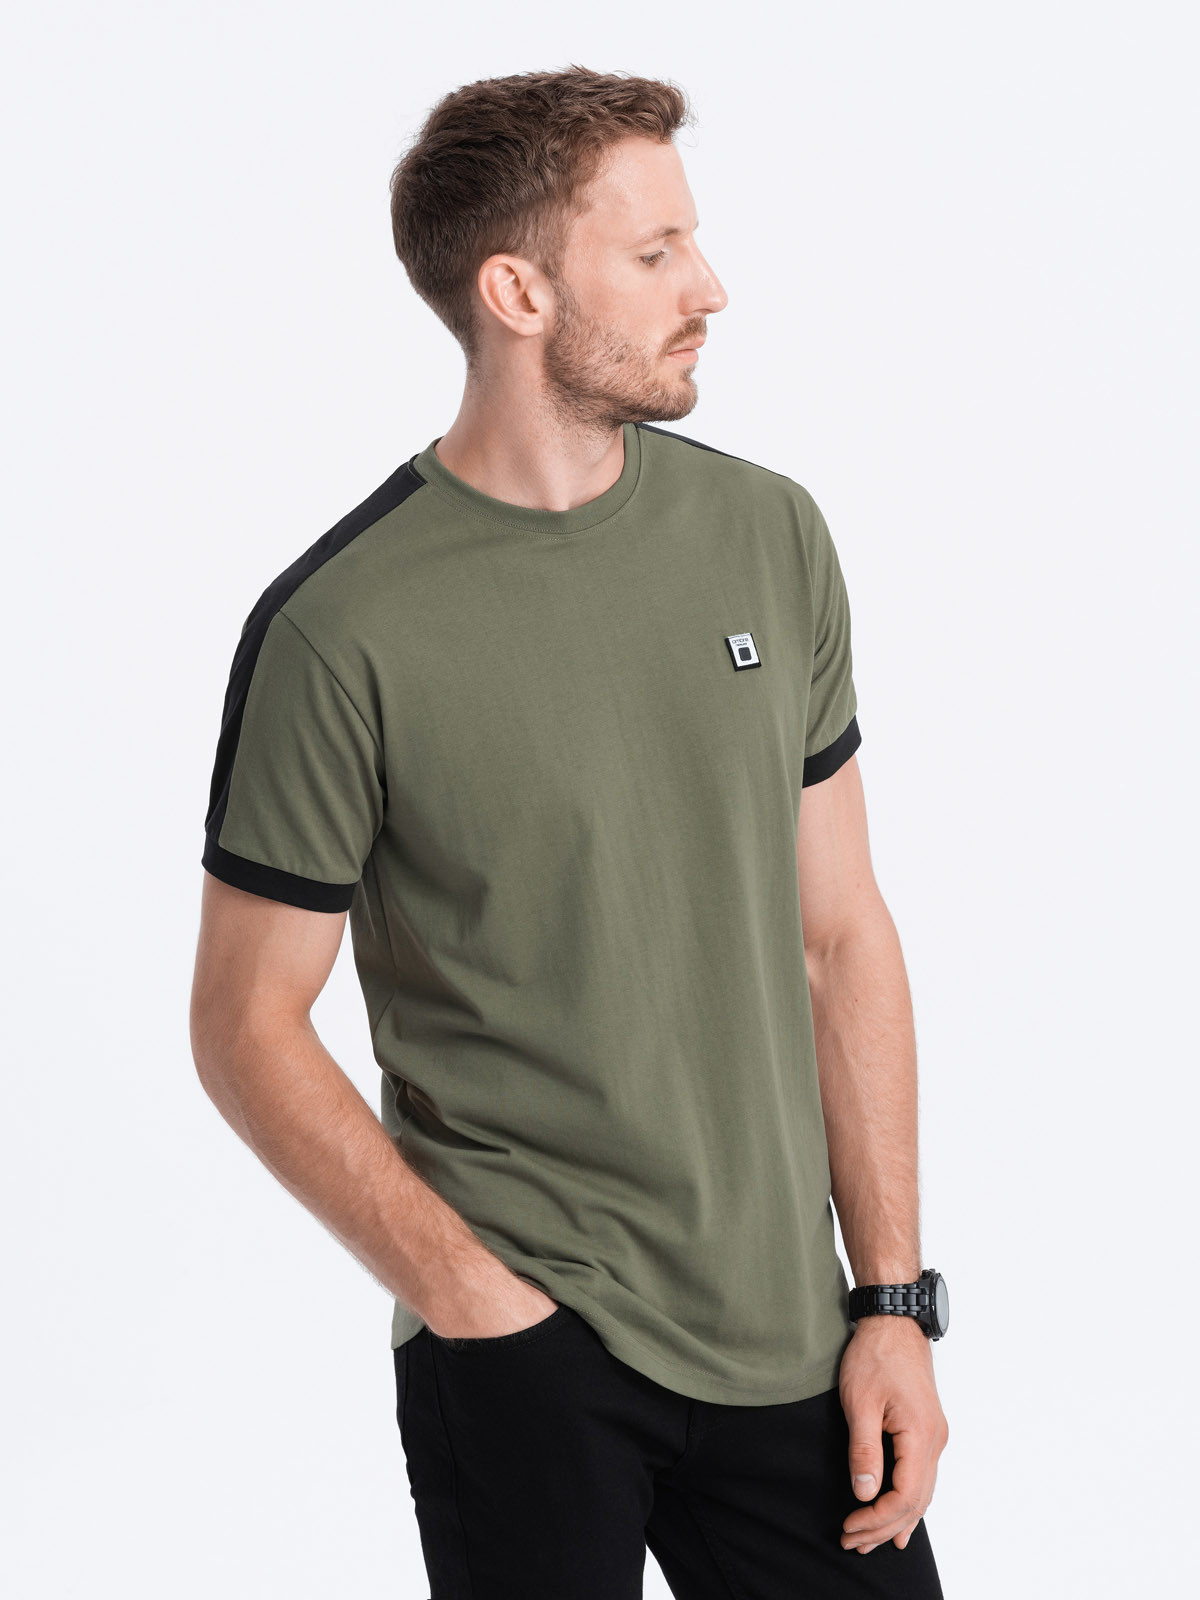 Men's cotton t-shirt with contrasting inserts V4 S1632